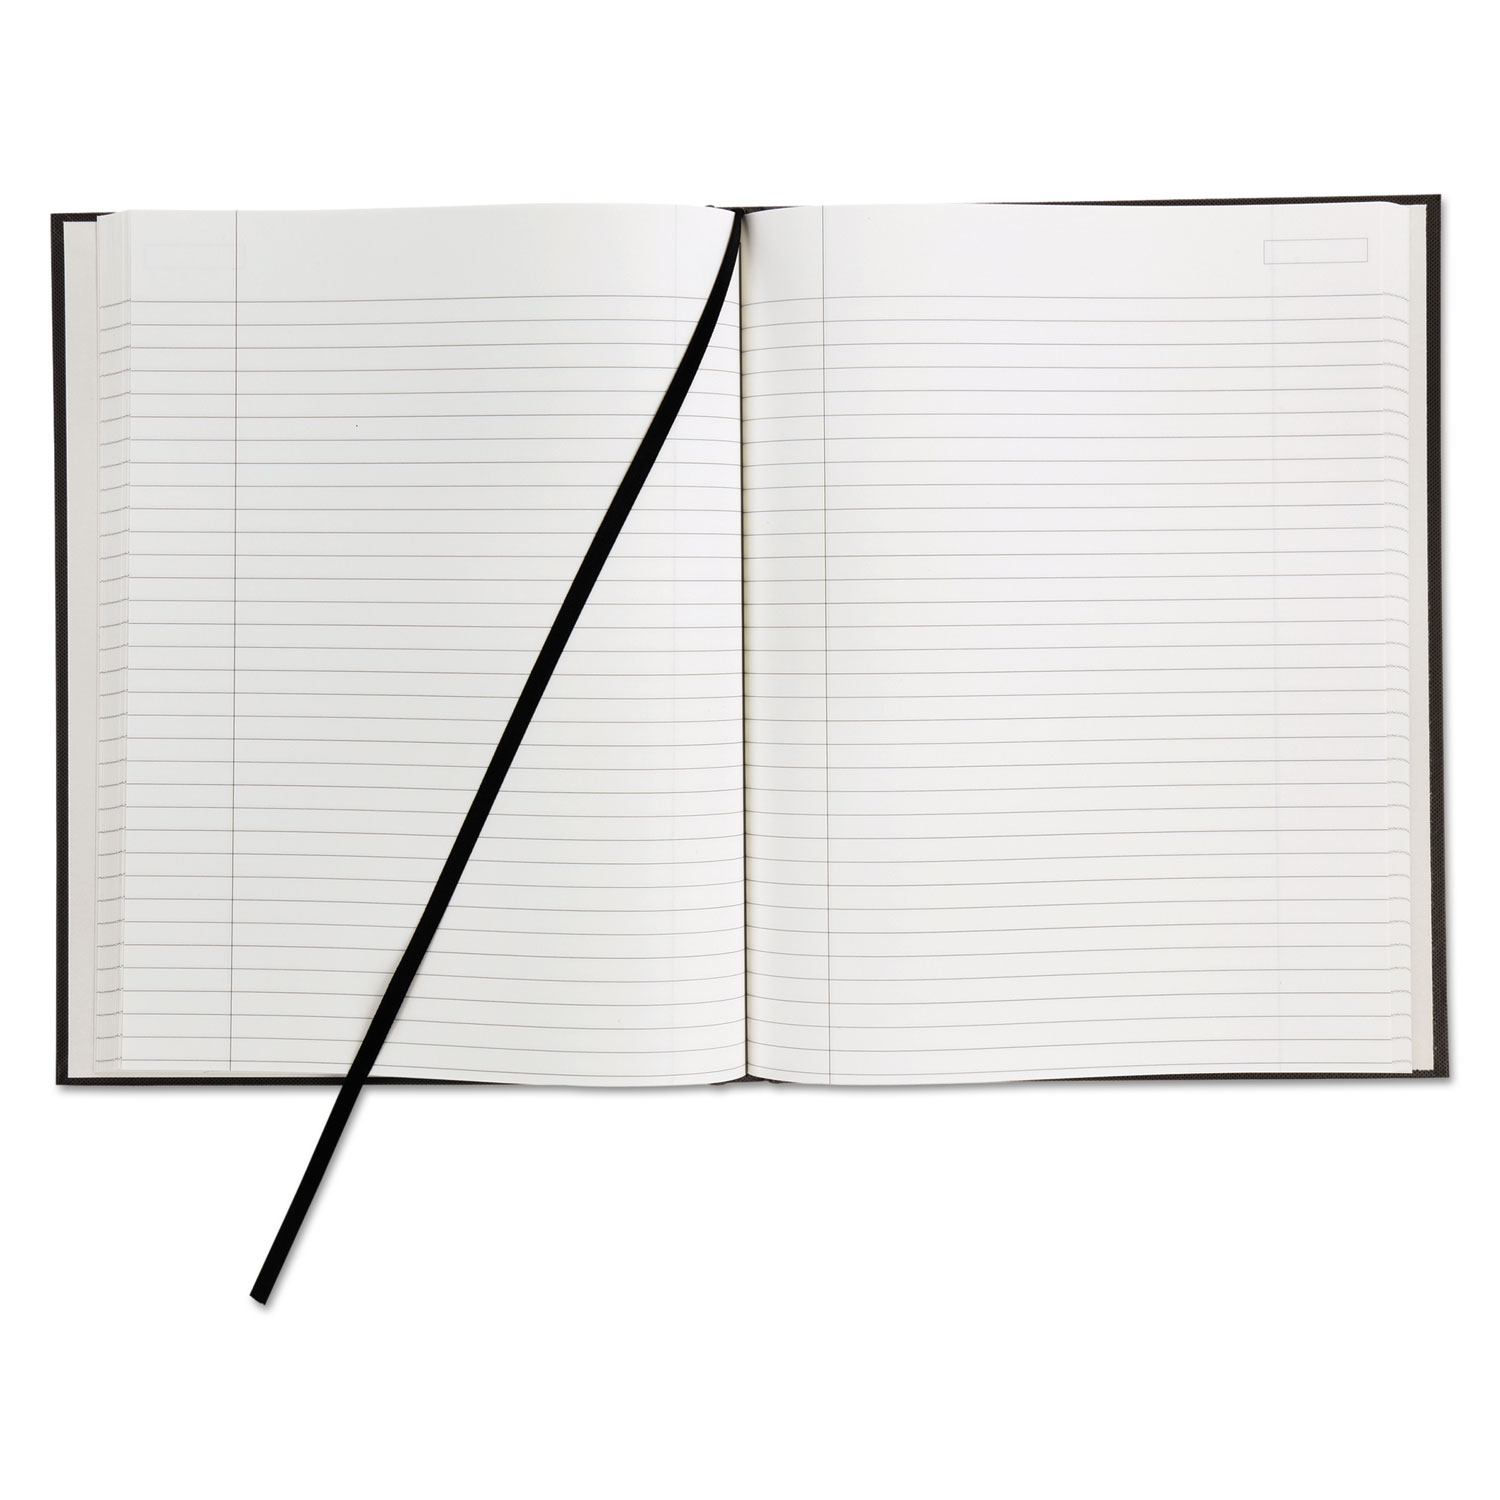 Royale Business Casebound Notebook, Legal/Wide, 10 1/2 x 8, White, 96 Sheets